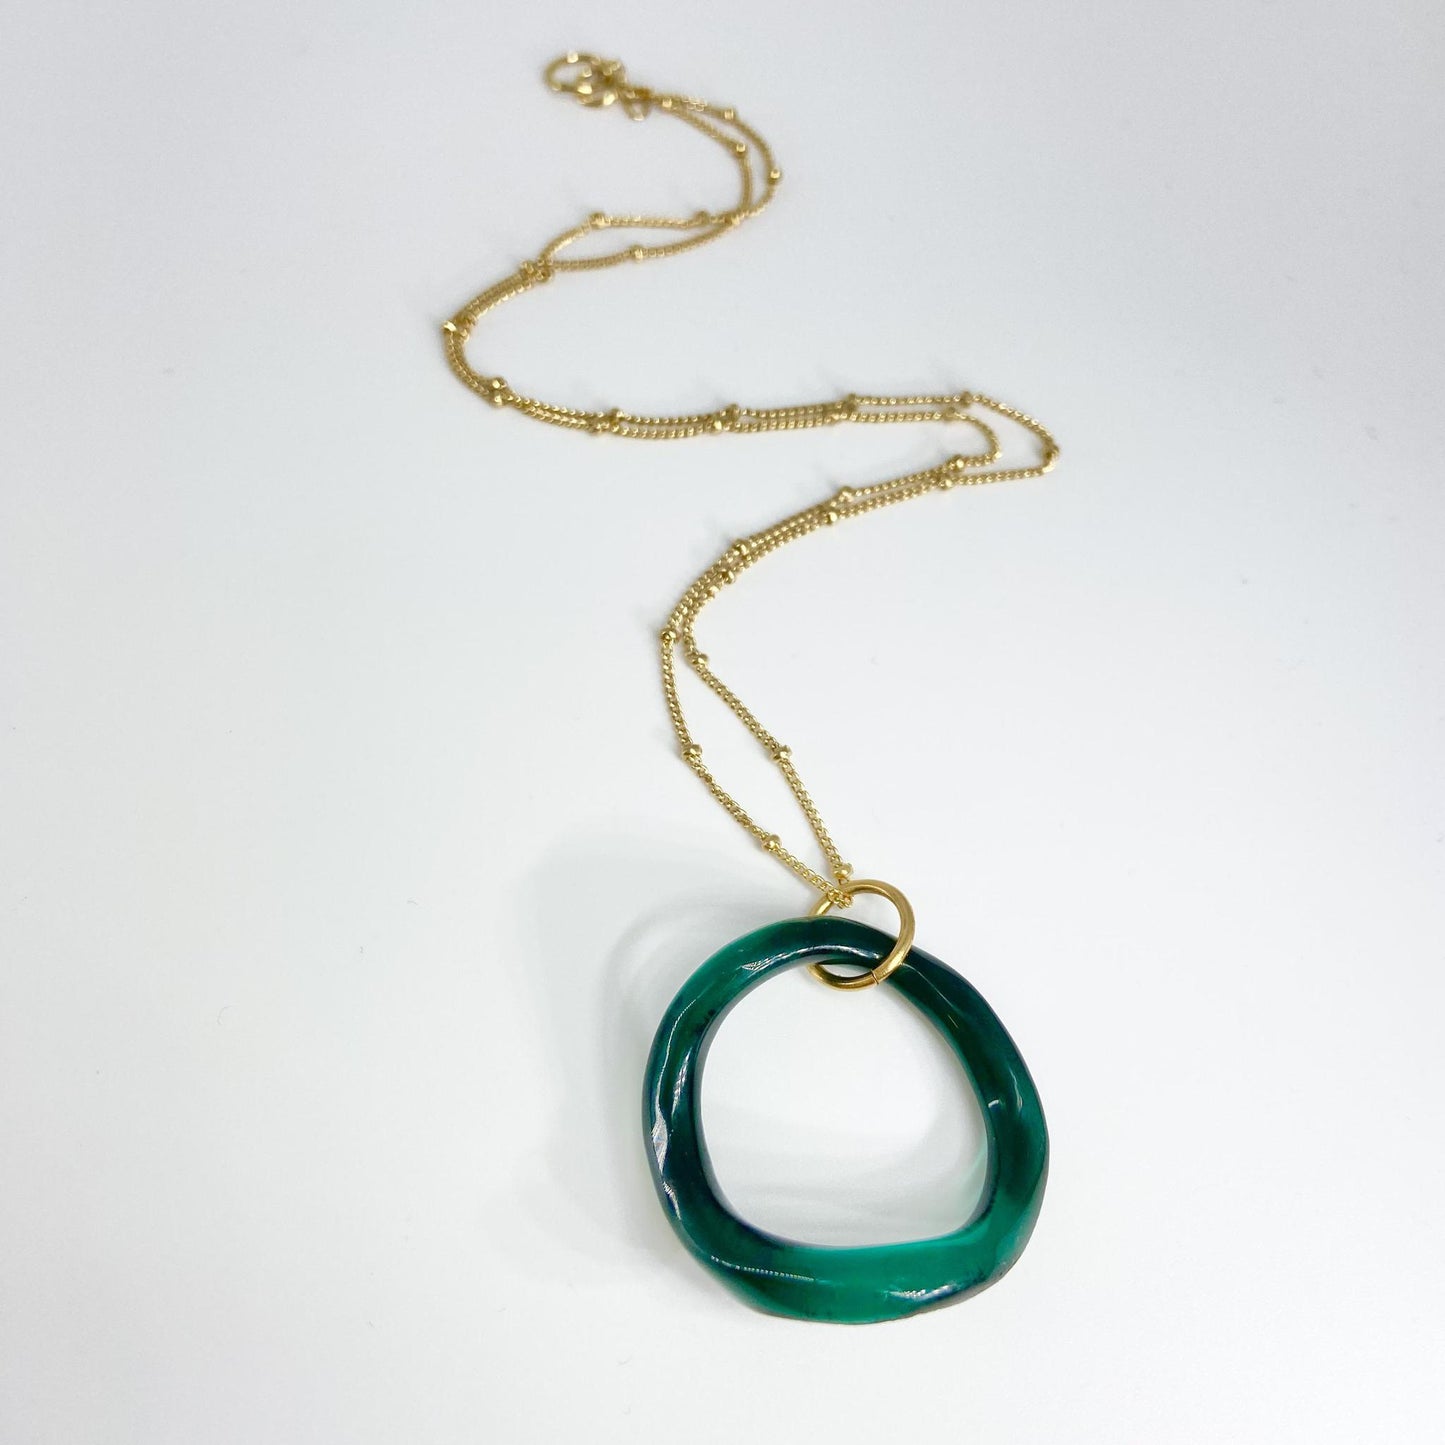 Necklace - Ruffled Glass Circle - 14kt Goldfill - Teal